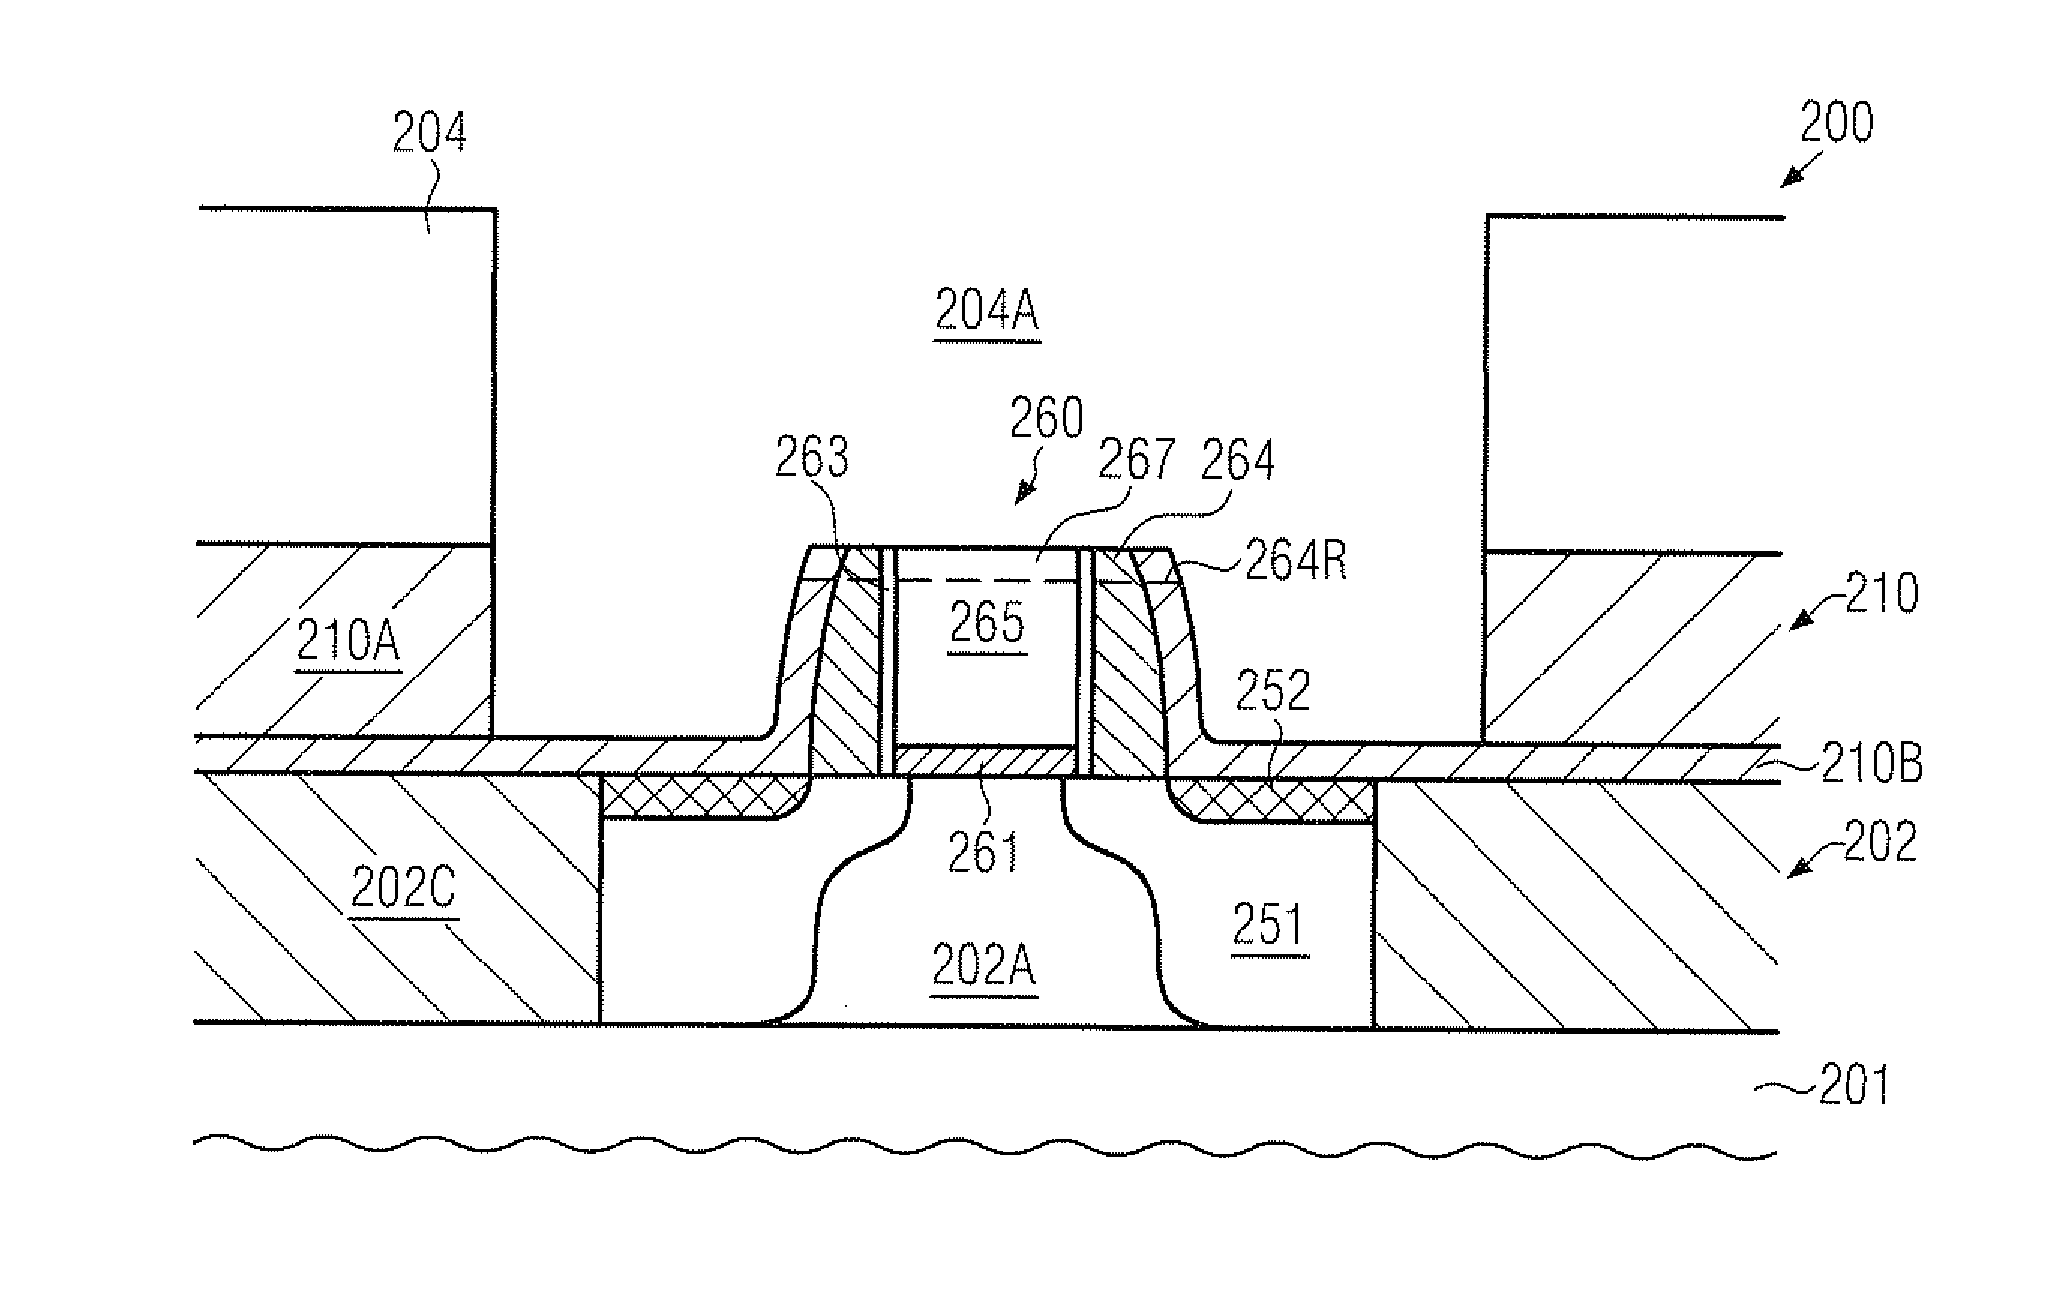 Contact bars with reduced fringing capacitance in a semiconductor device